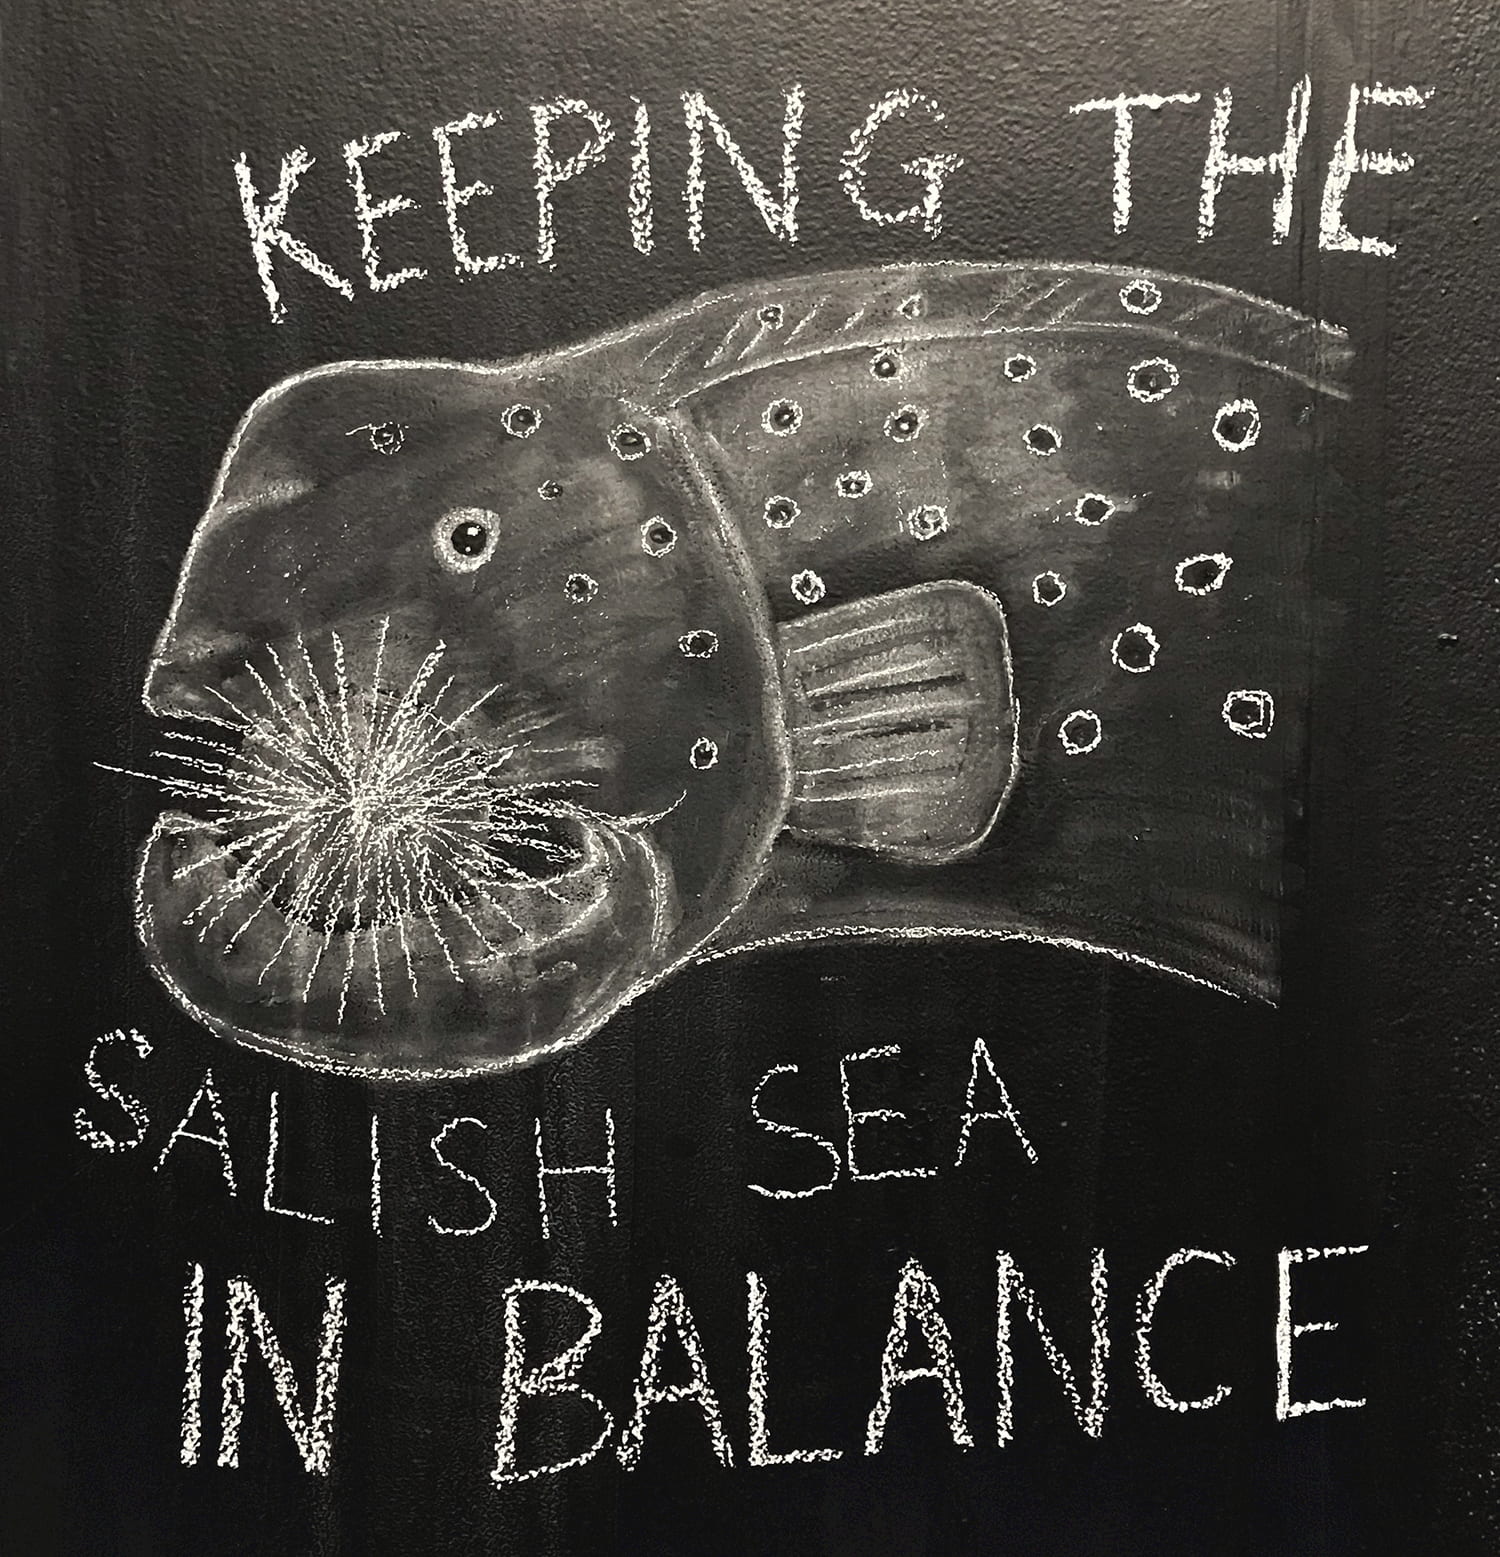 drawing of an eel's head surrounded by the words "Keeping the Salish Sea in balance"